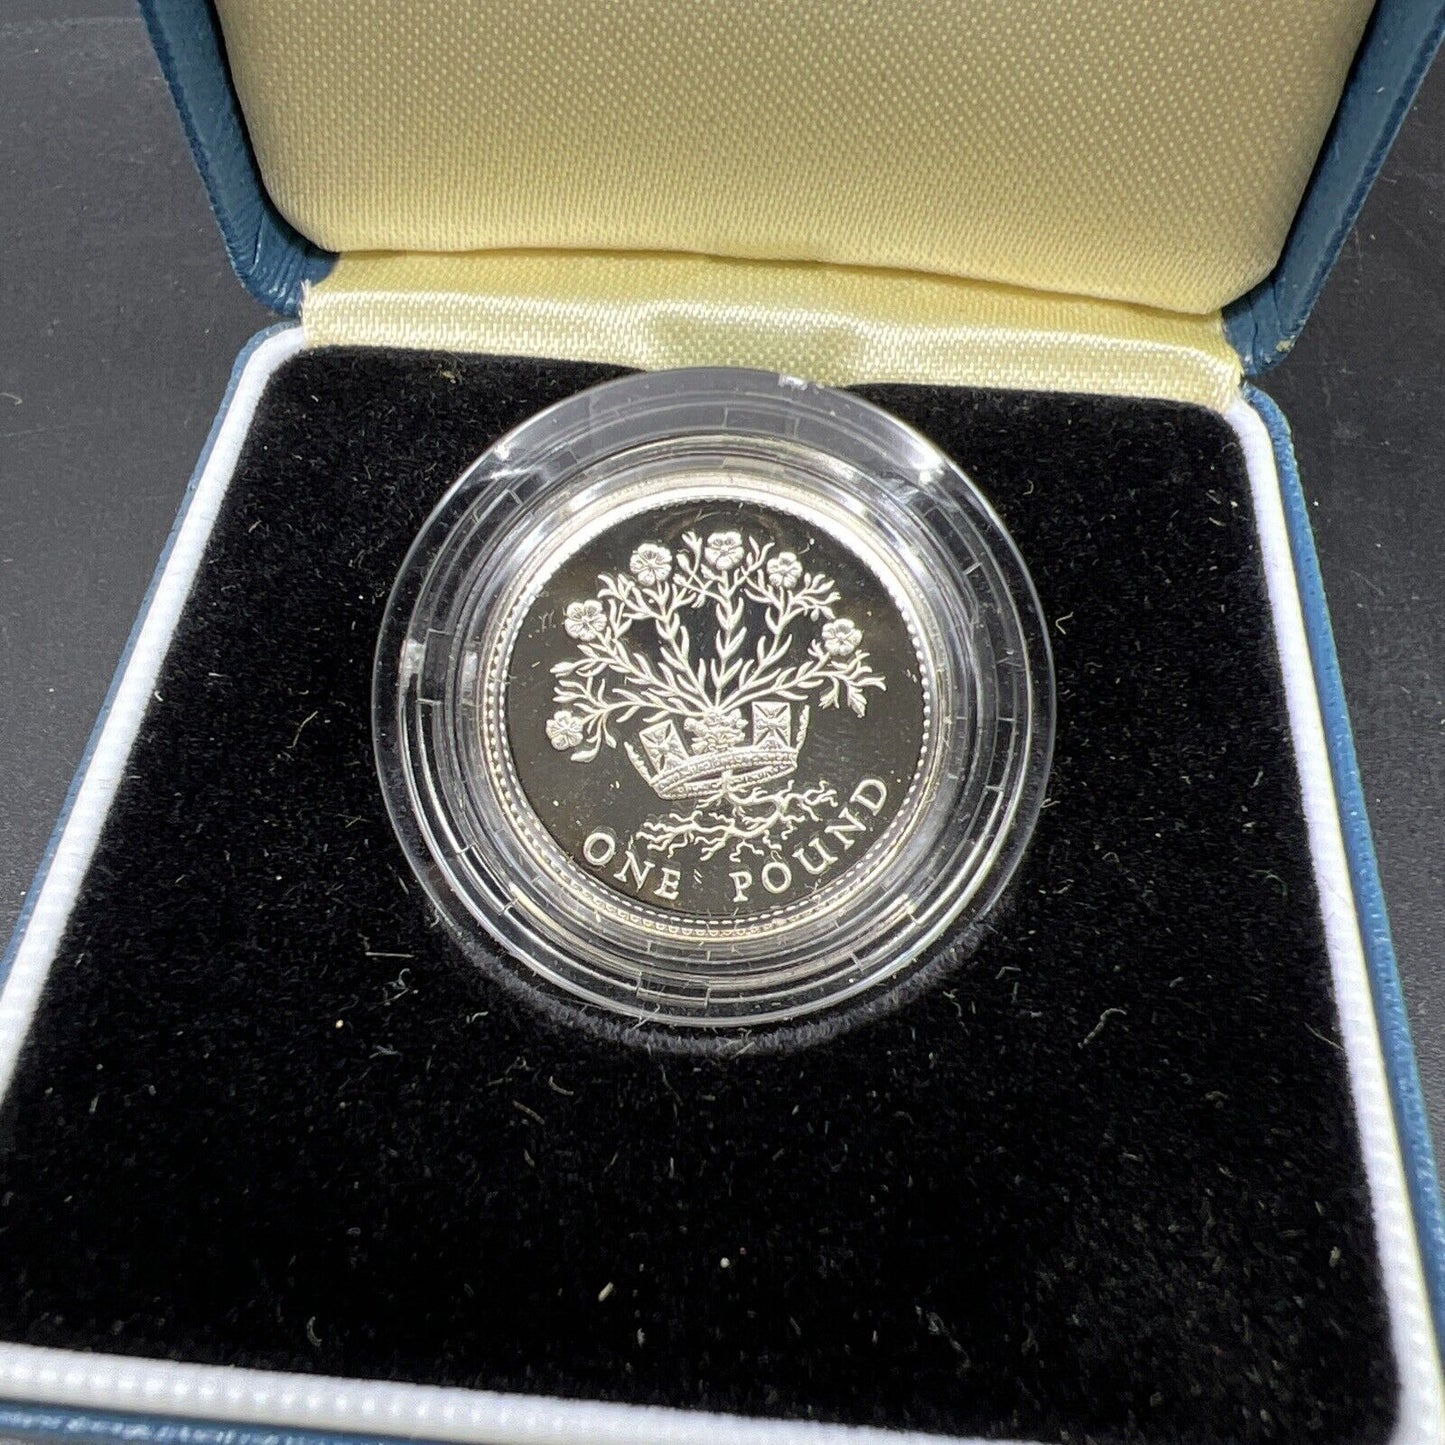 1986 UK Sterling Silver Proof One Pound Coin w/ Box & COA